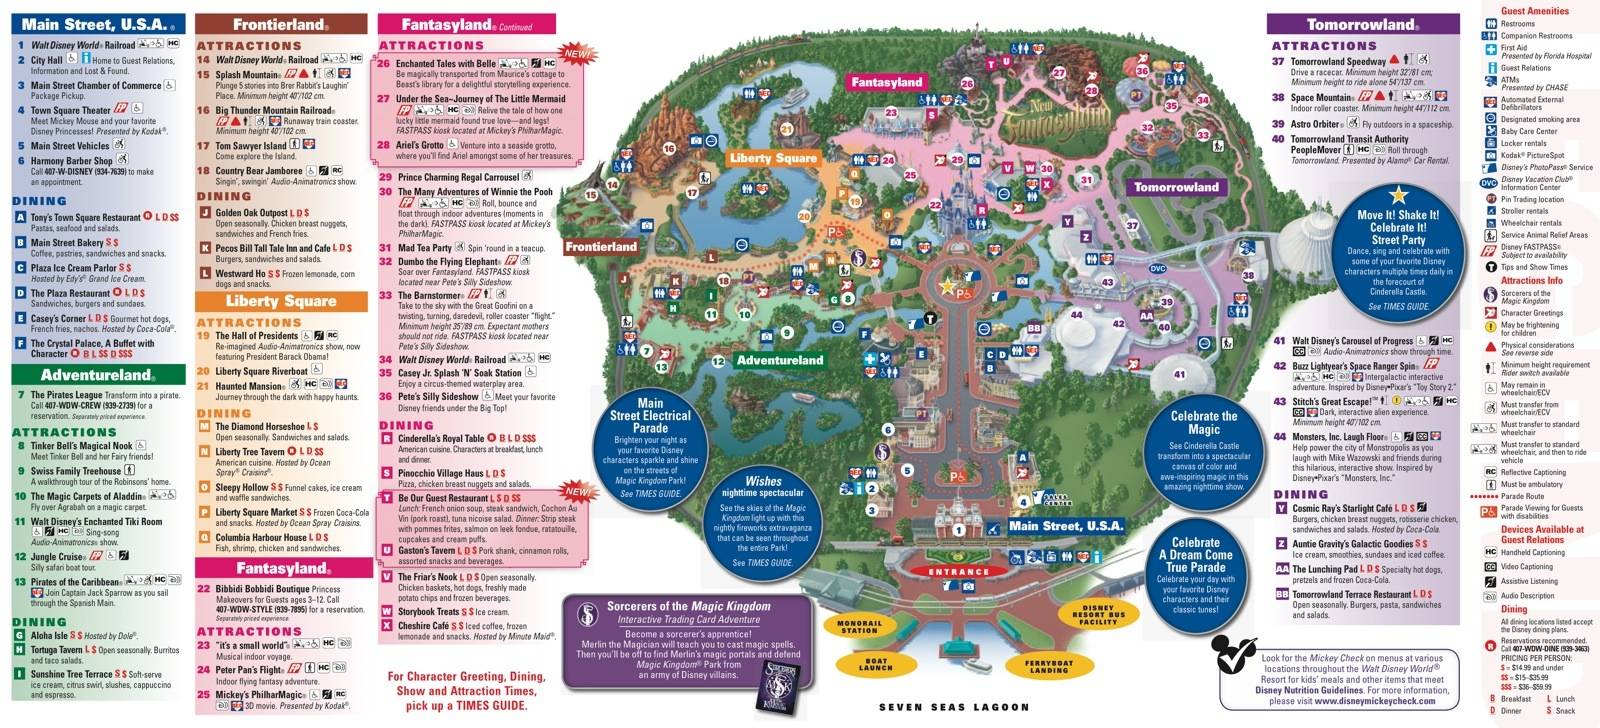 PHOTOS - New Fantasyland shown on the new Magic Kingdom guide maps